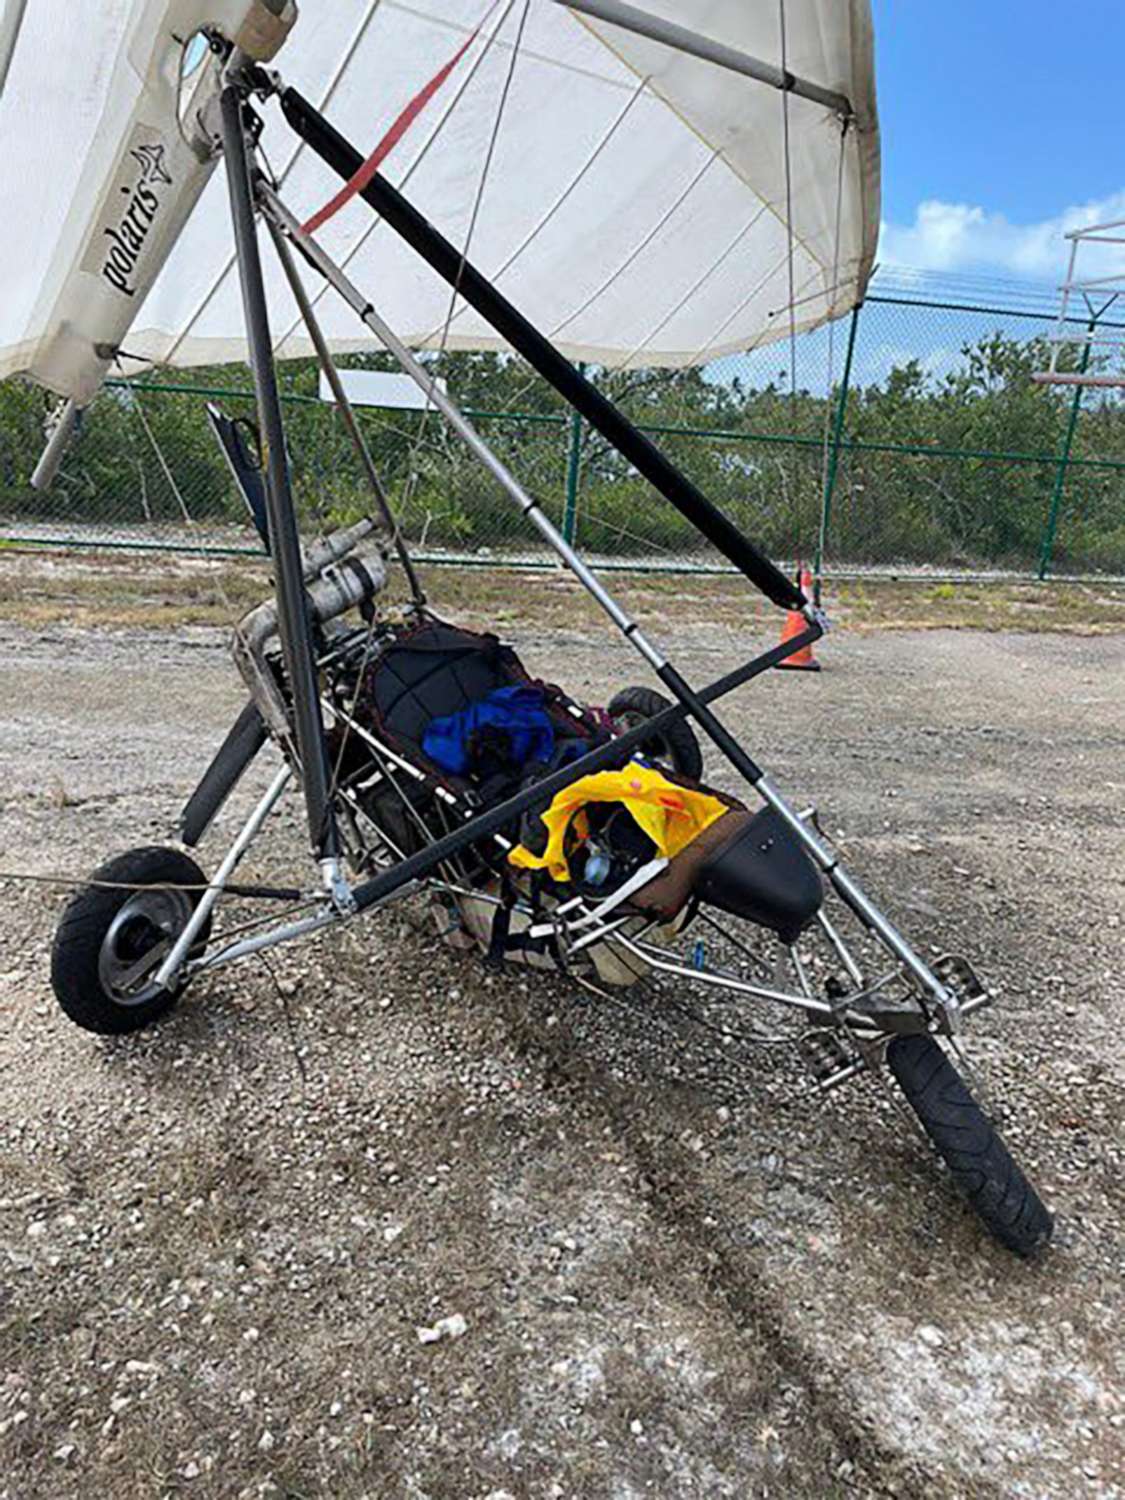 PHOTO: Two Cuban migrants were taken into U.S. Border Patrol custody after landing at the Key West International Airport onboard a powered hang glider, Mar. 25, 2023.